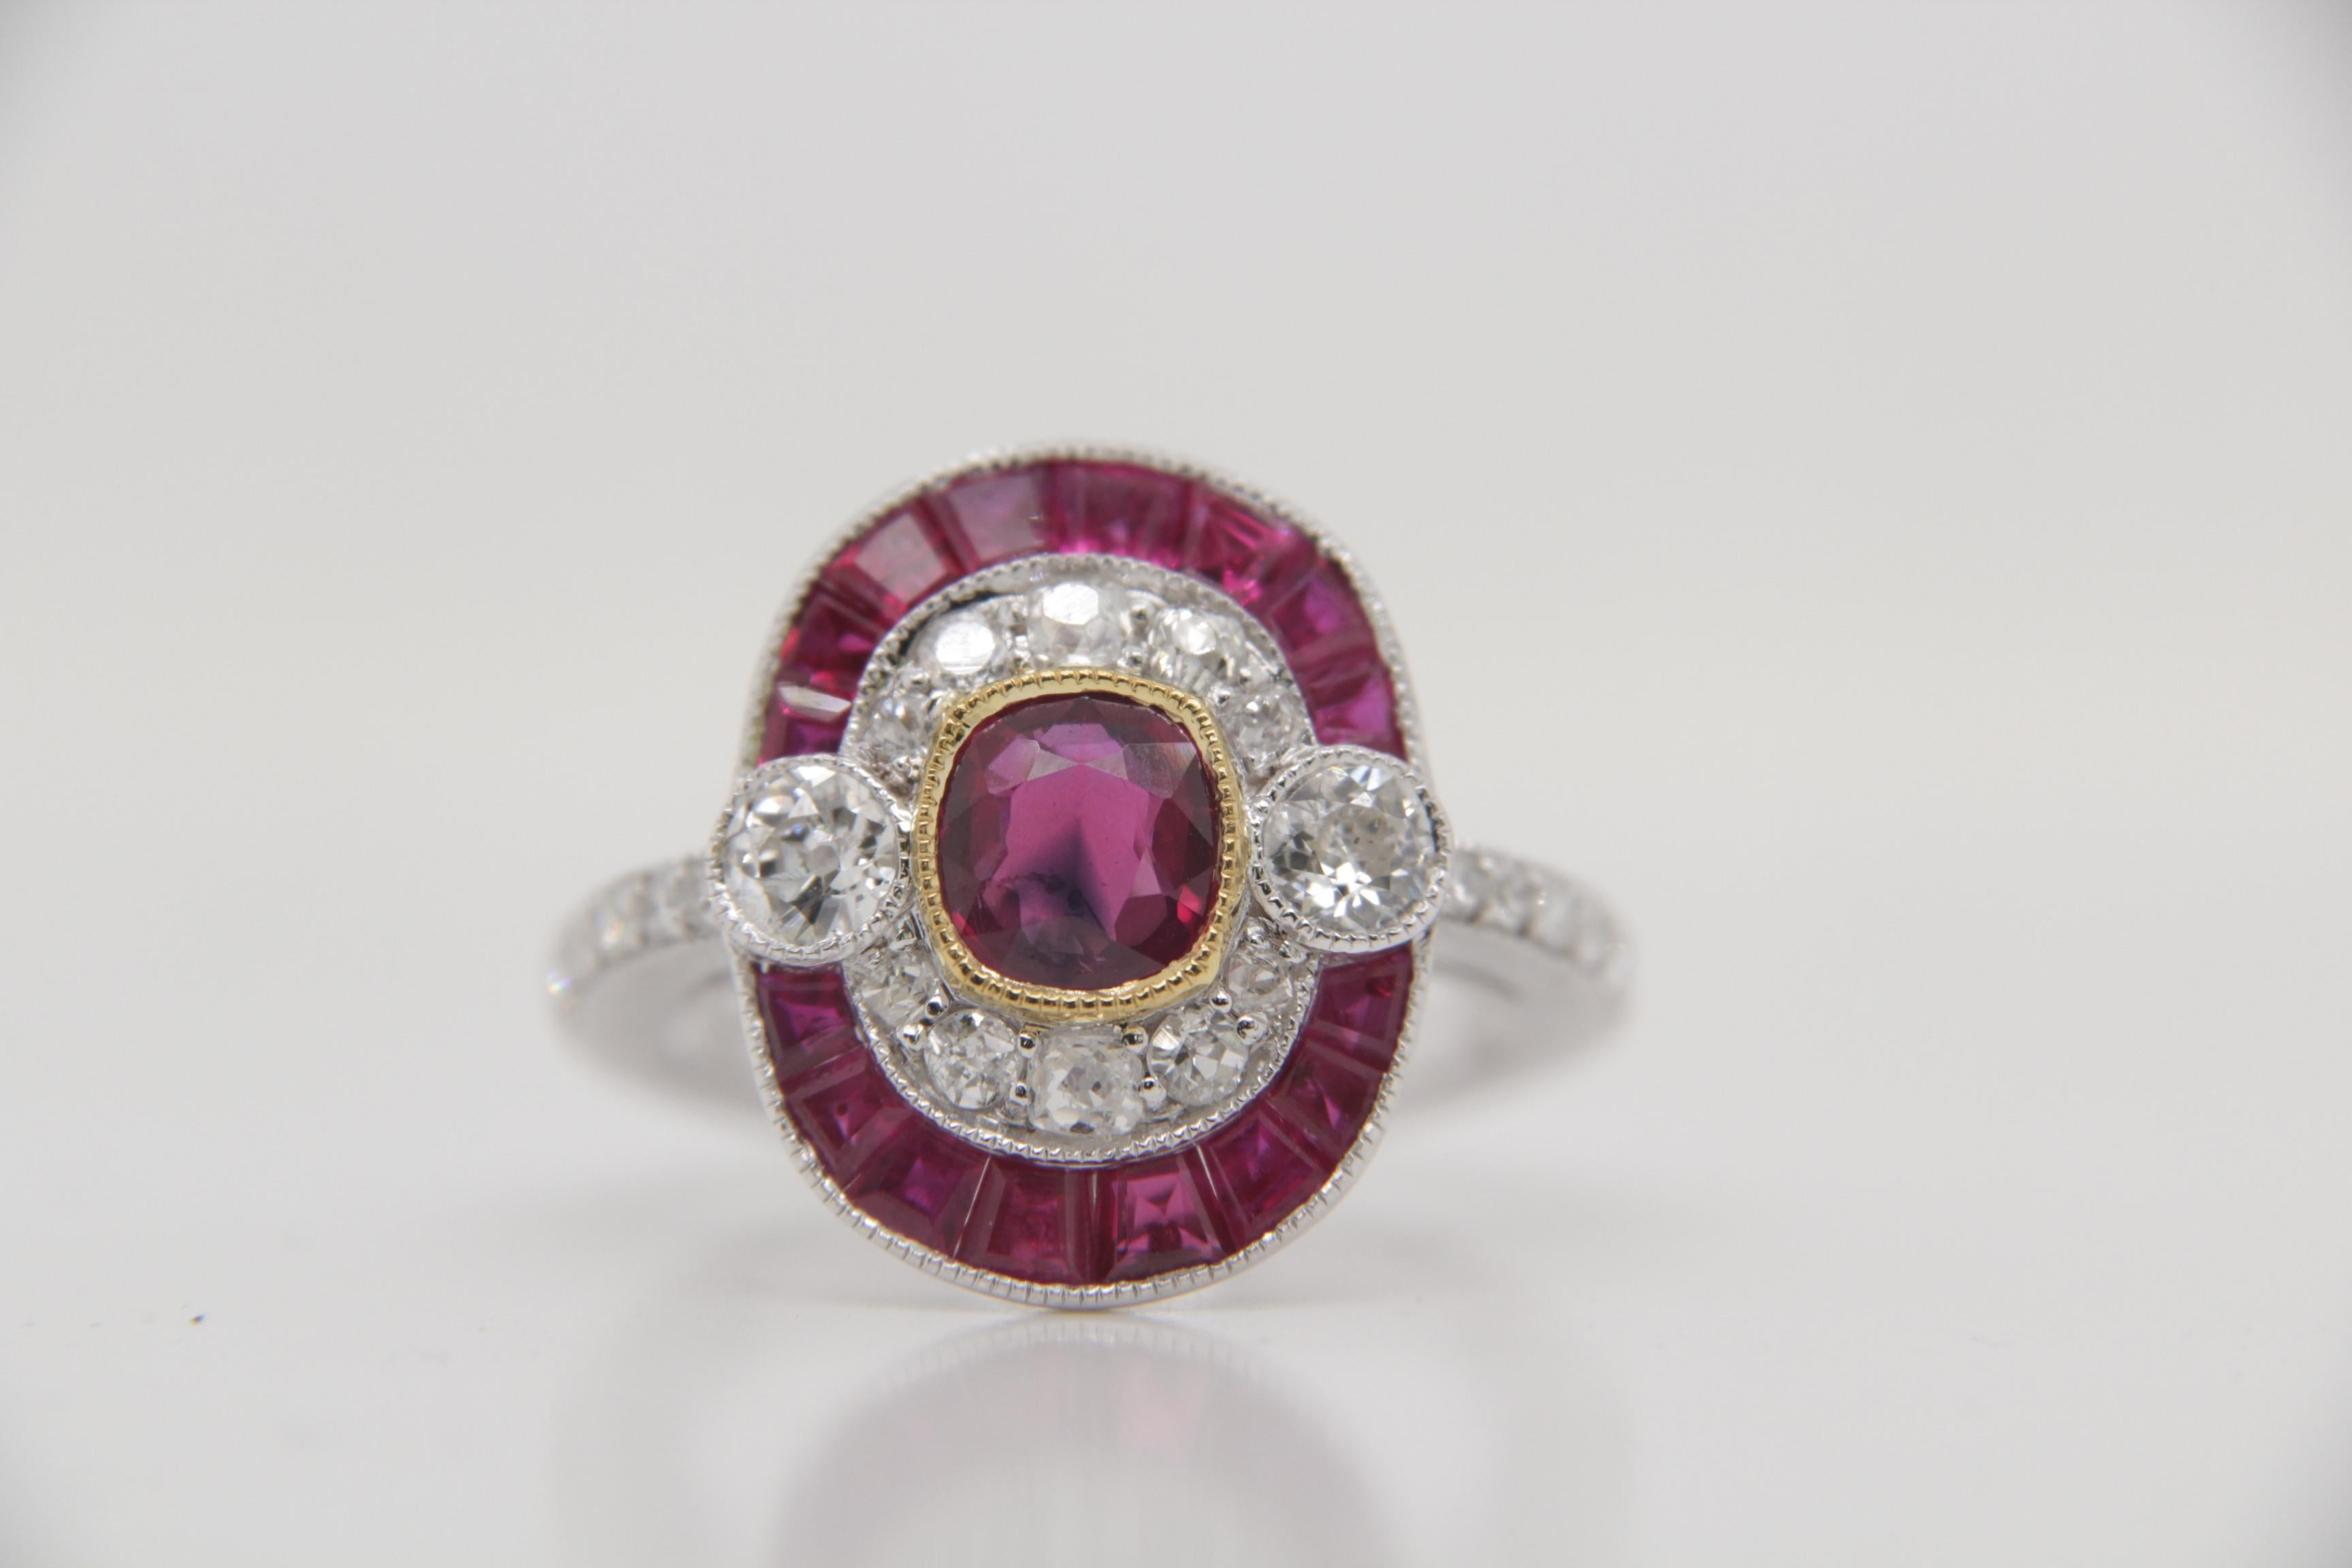 A brand new handcrafted ruby ring by Rewa Jewels. The ring's center stone is 0.88 carat Burmese ruby certified by Gem Research Swisslab (GRS) as natural, unheated, 'Pigeon blood' with the certificate number: 2021-121223. The centre ruby has been set